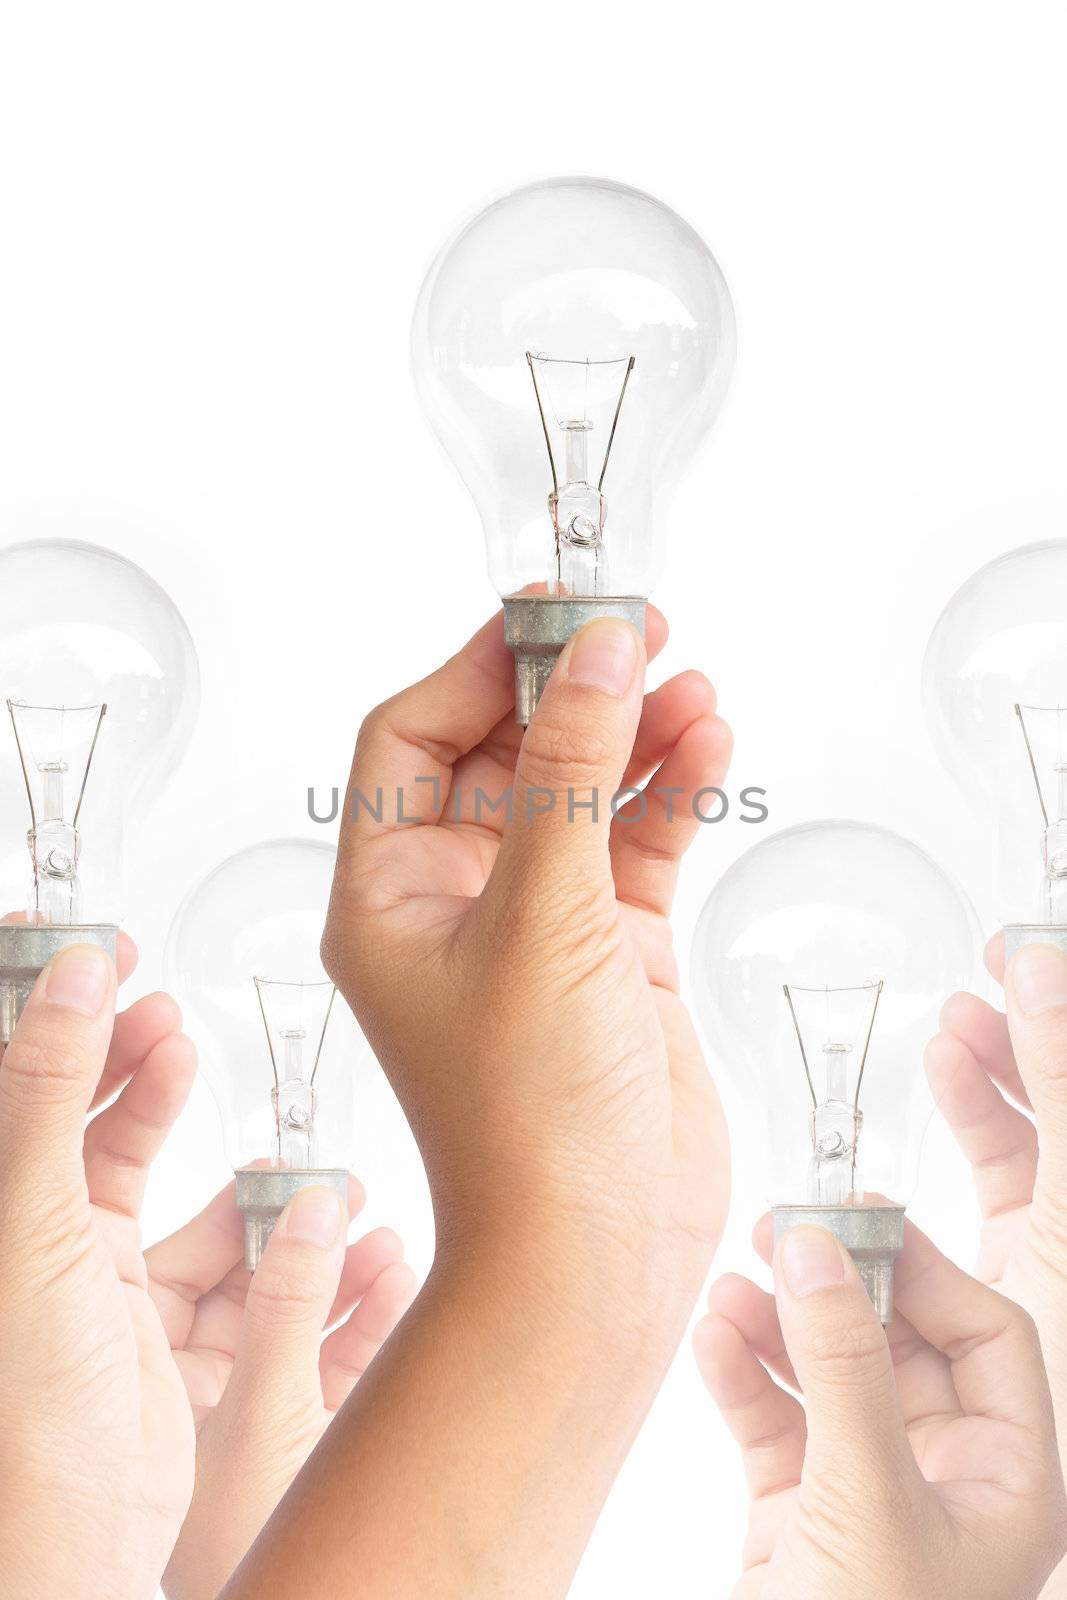 light bulb in hand by ponsulak